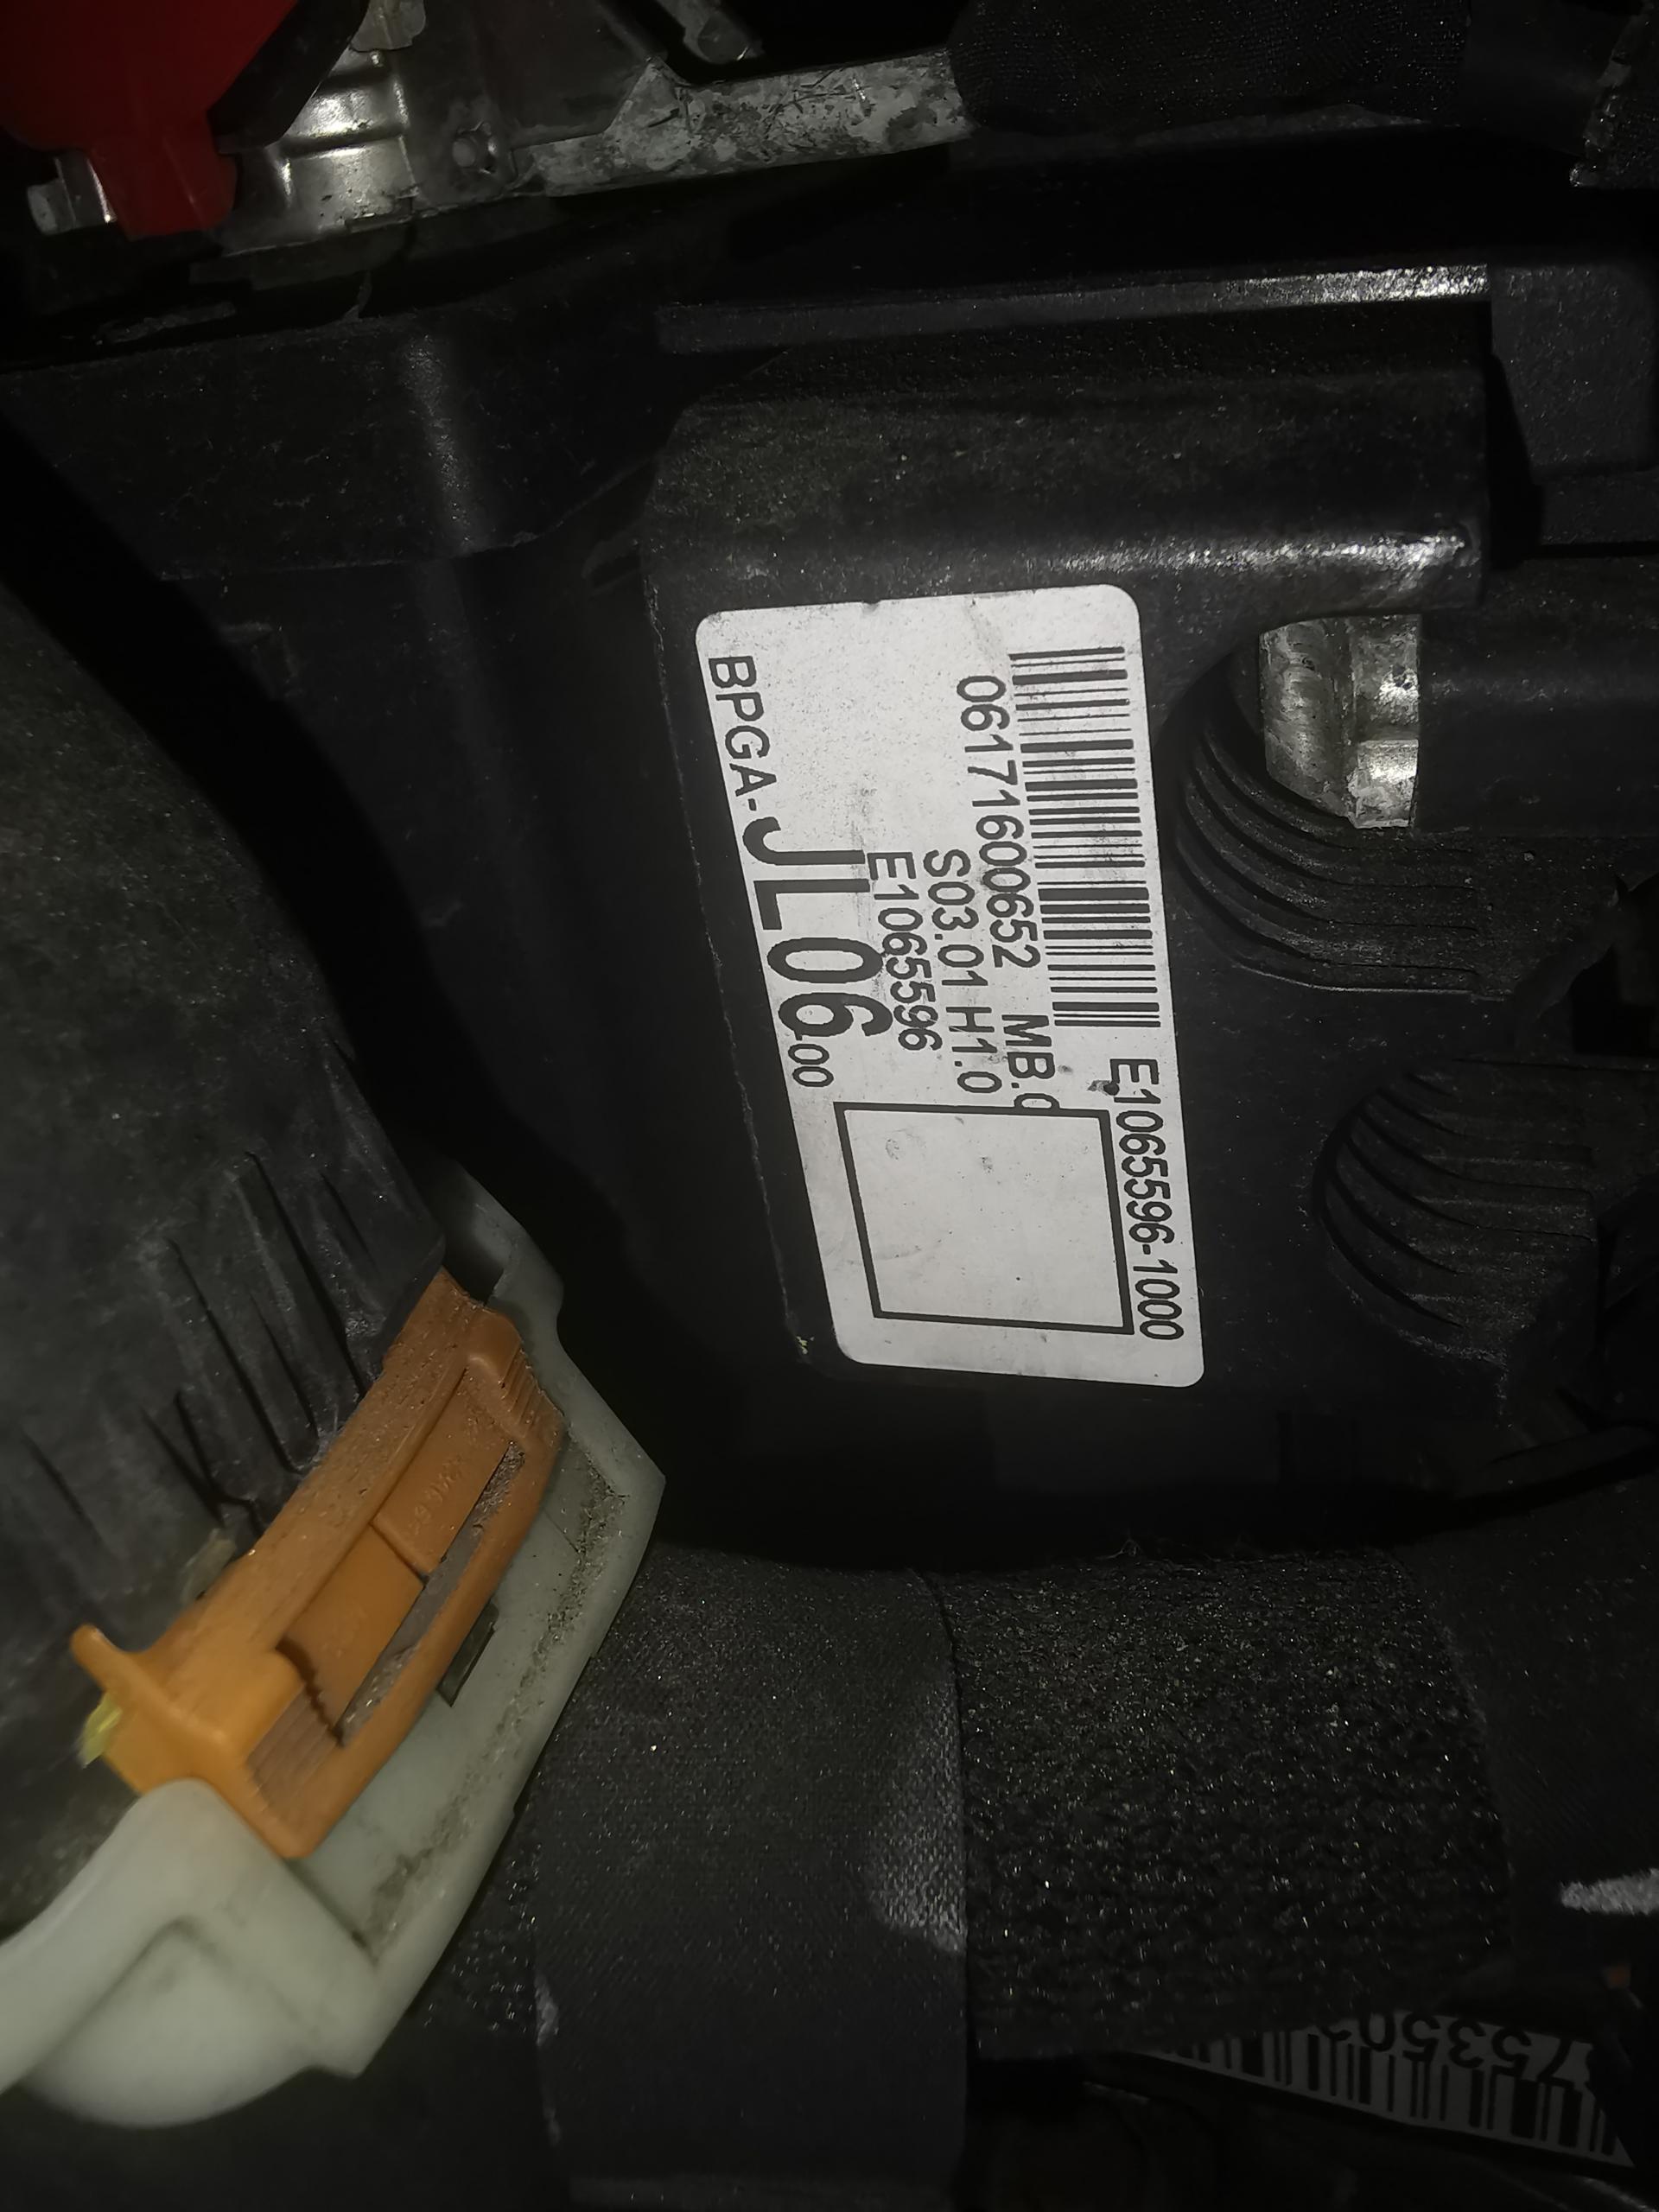 2017 Peugeot 3008 issues - Page 1 - French Bred - PistonHeads UK - The image shows a close-up of an engine, specifically focusing on the spark plug area. There is a white label with black text attached to the engine, and it appears that someone has attempted to remove the spark plug but not successfully. A pair of pliers is visible in the lower part of the image, indicating that this may be an ongoing repair or maintenance process. The engine seems to be from a vehicle, as suggested by the presence of components typically found in automotive engines.